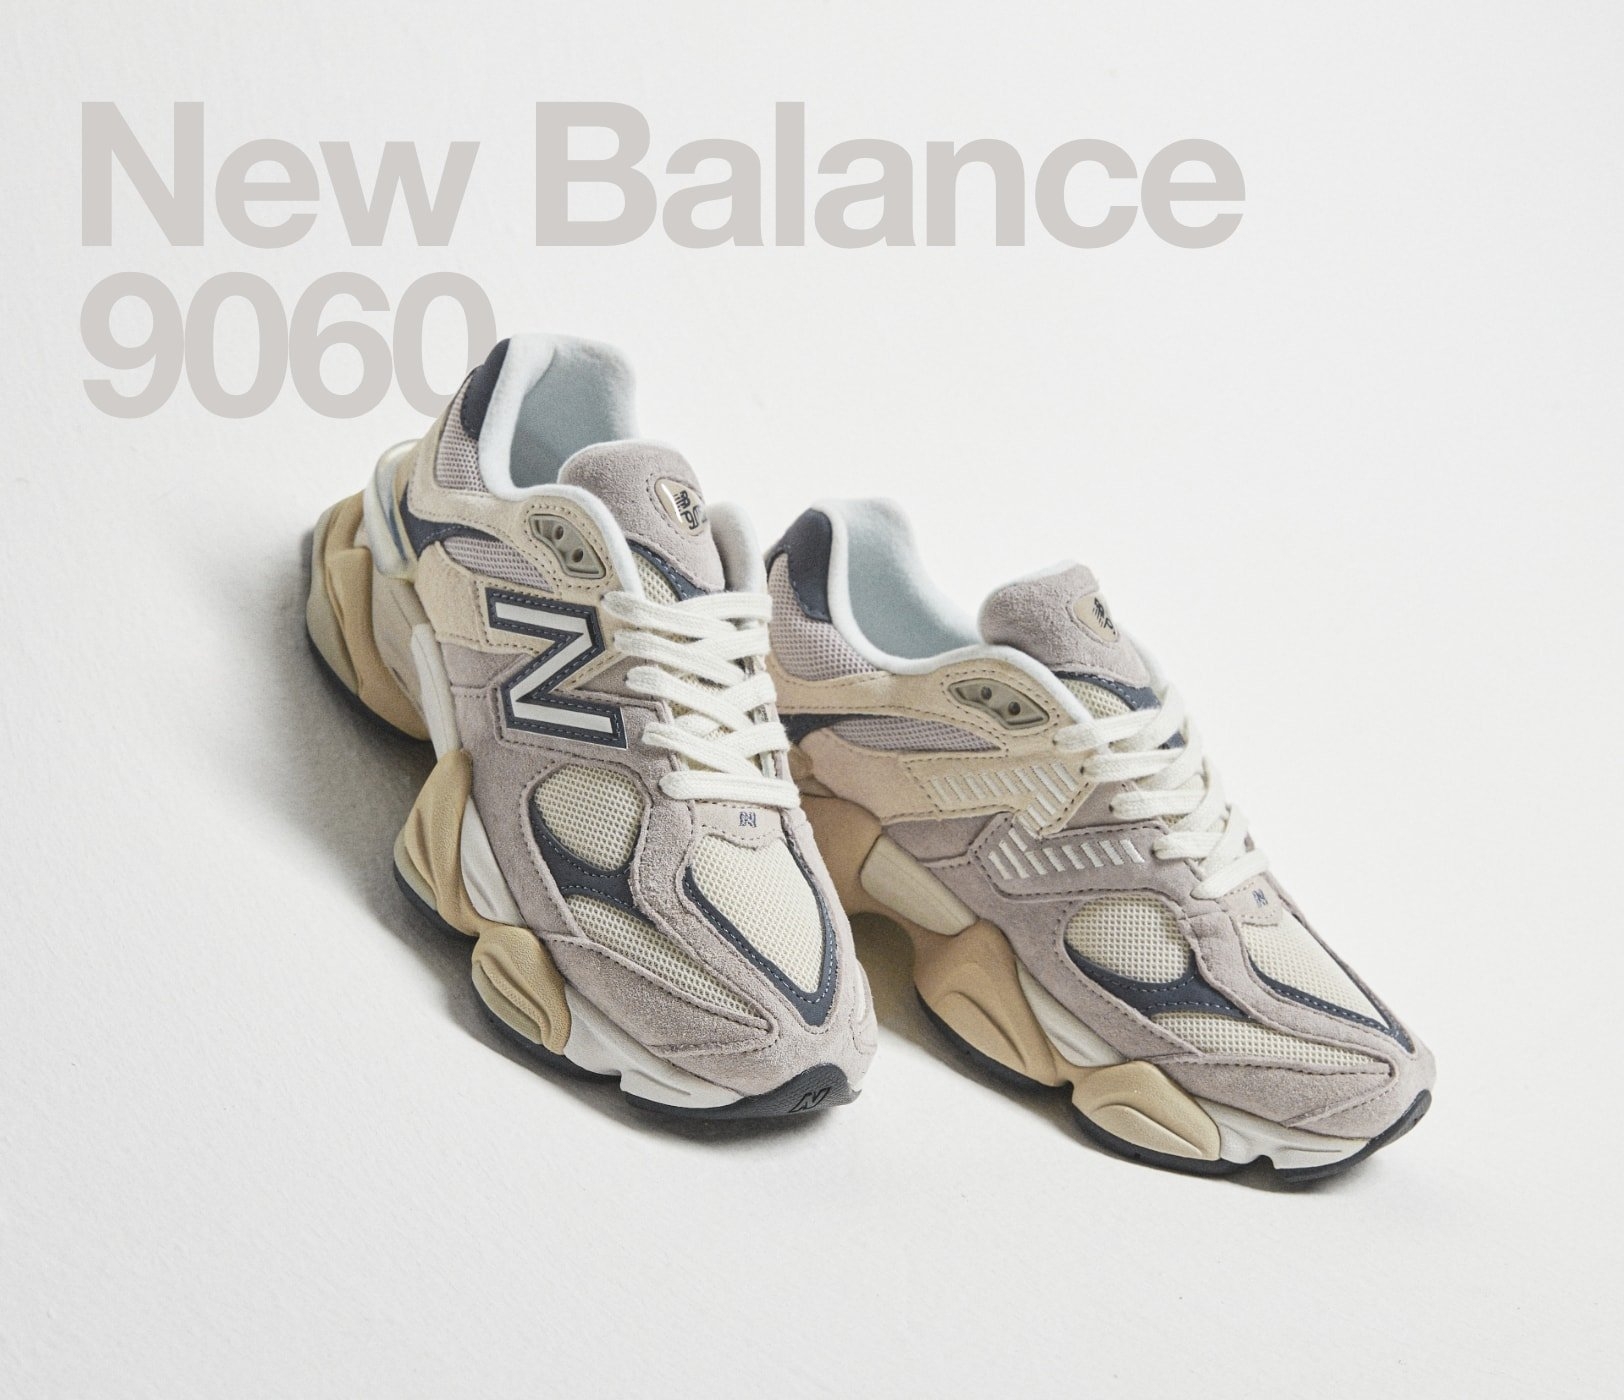 New Balance has had some very intriguing collaborative efforts in 2020